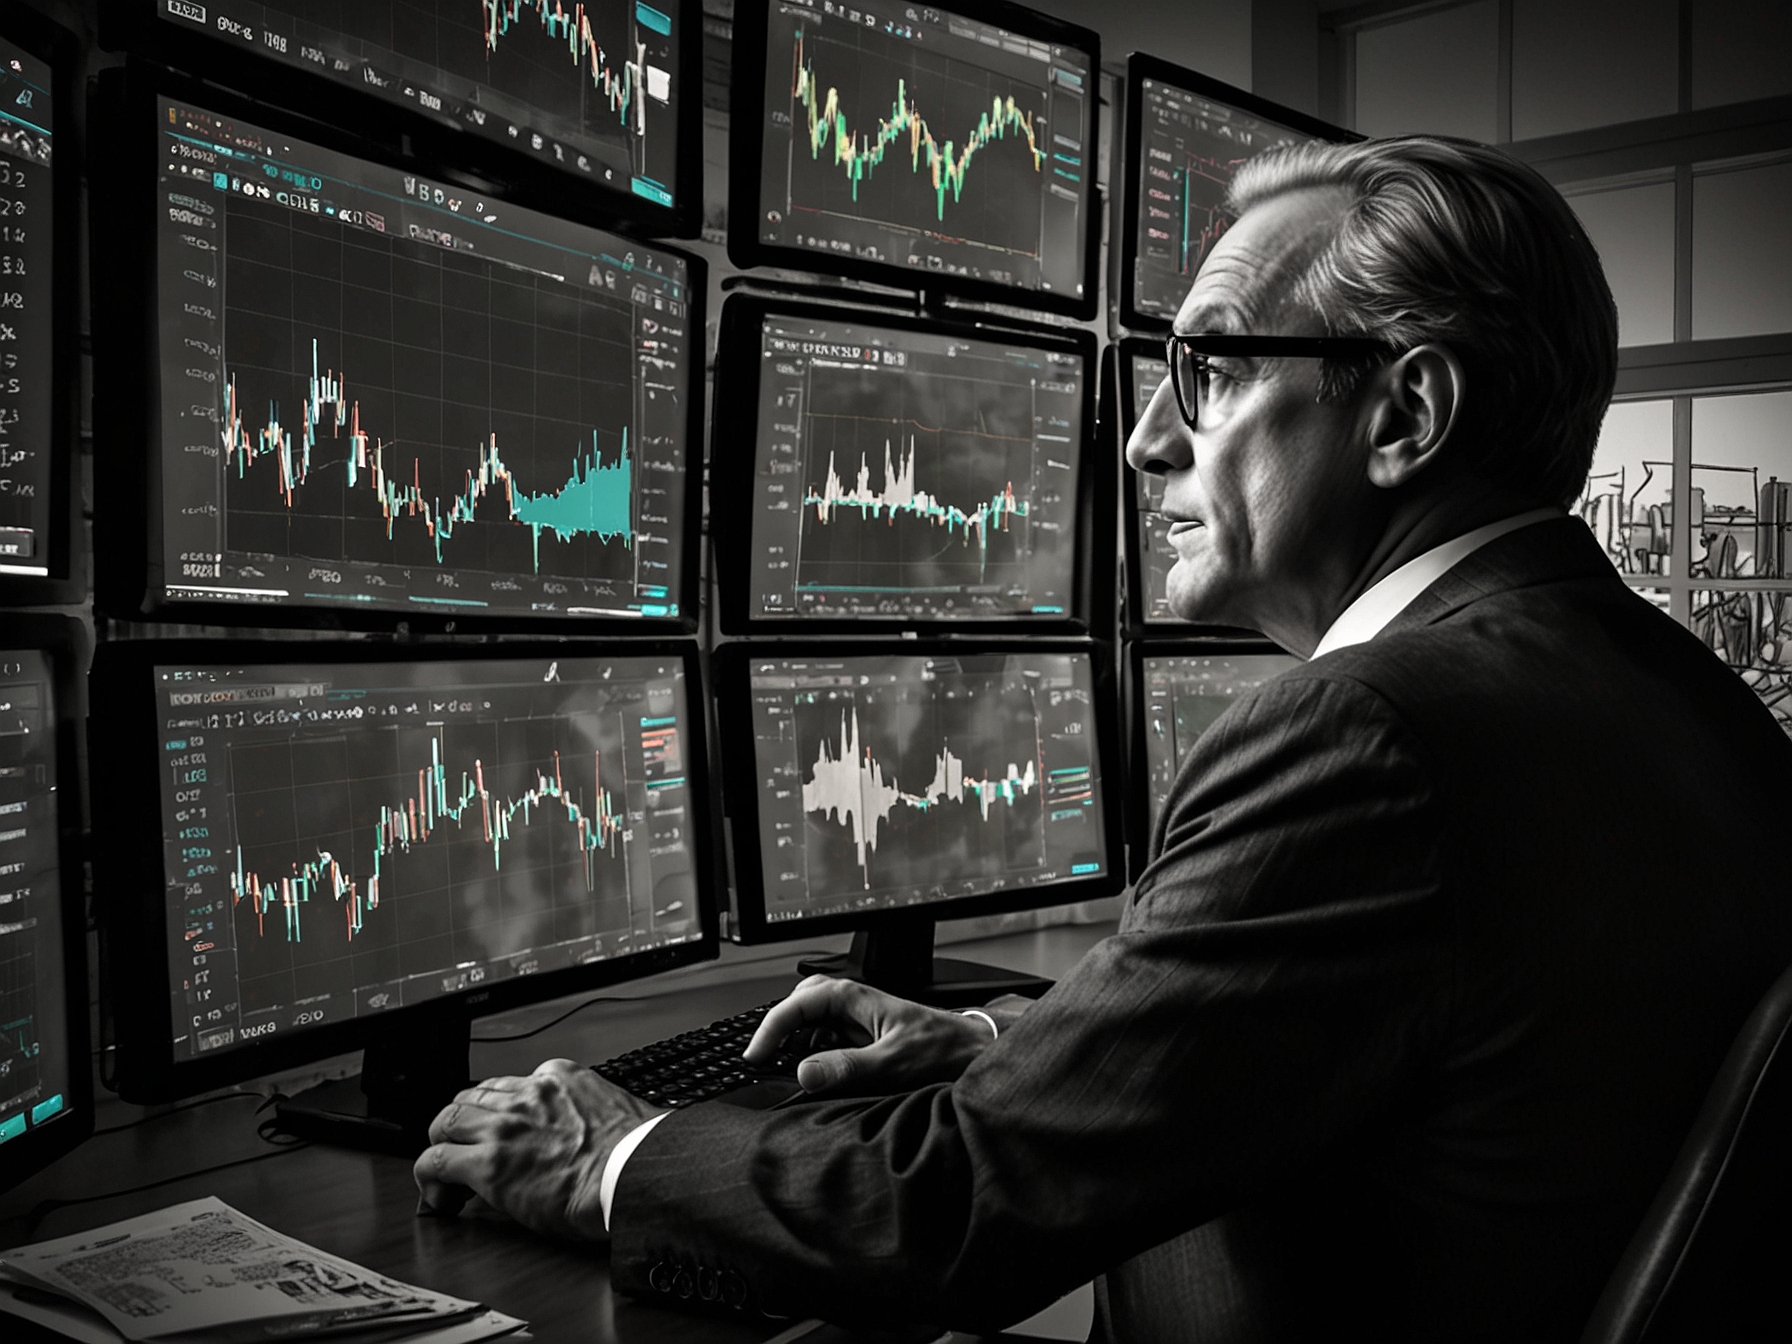 An investor closely analyzing stock trends on a computer screen, reflecting Penn Entertainment’s potential buyout interest and the subsequent market buzz.